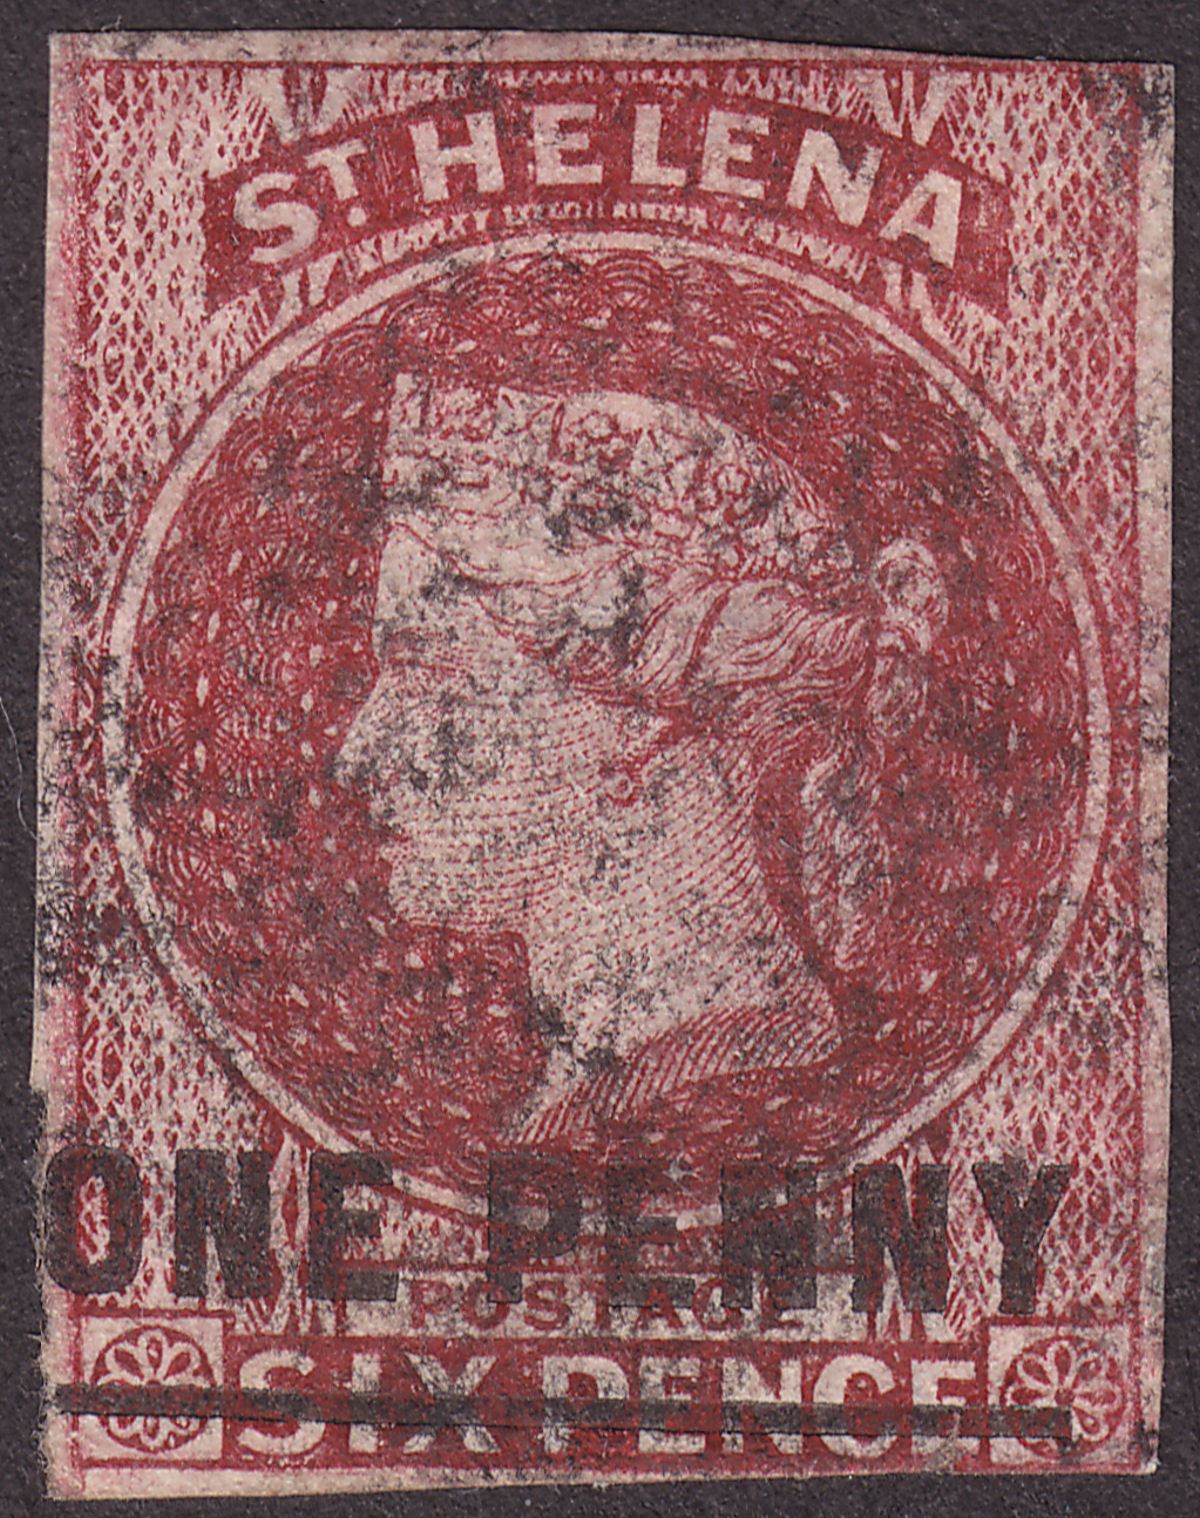 St Helena 1863 QV 1d Lake type B Imperf Used SG4 cat £275 with two margins